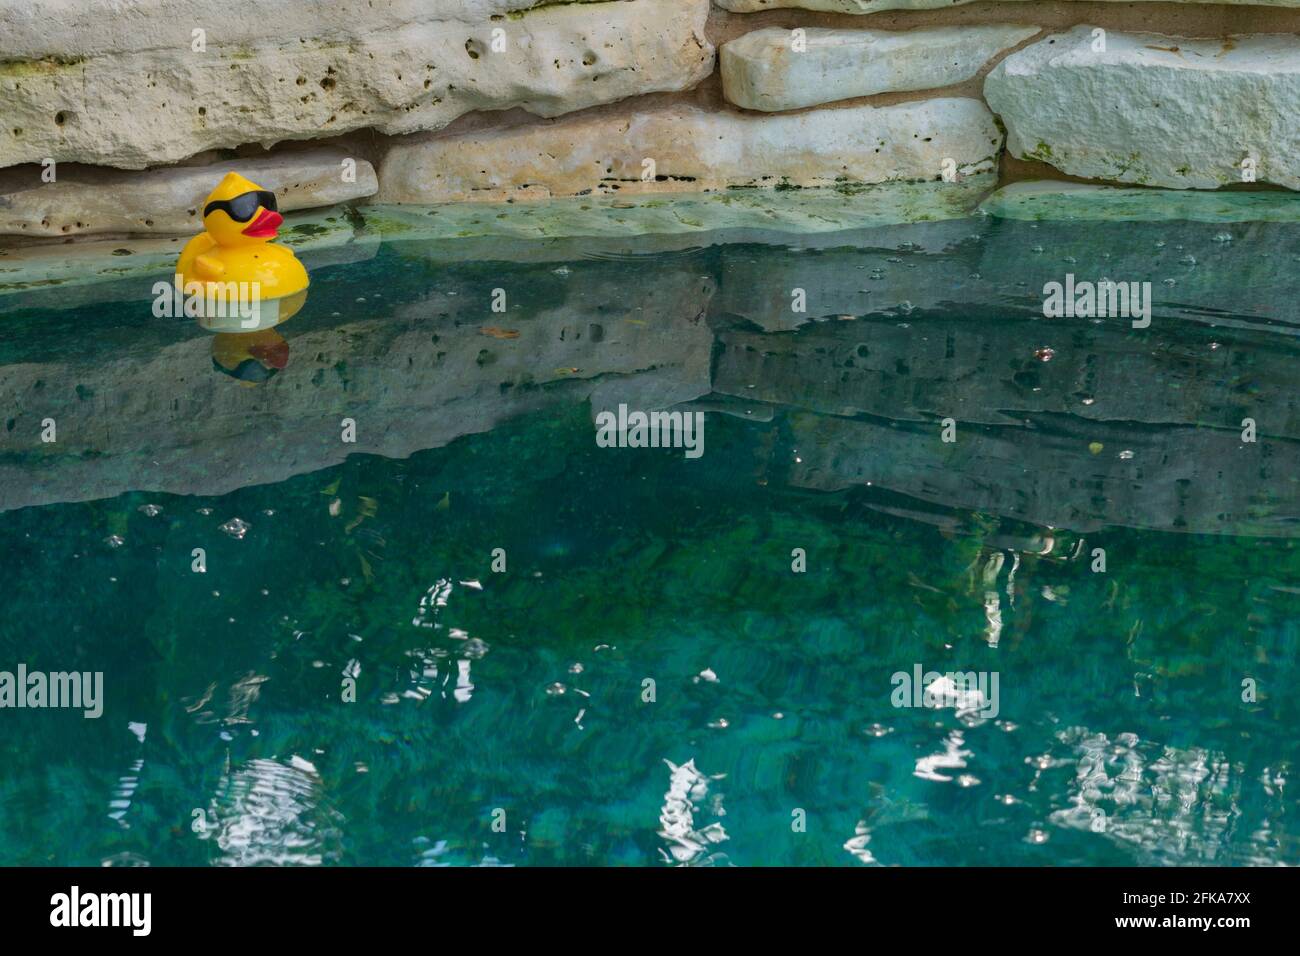 A yellow rubber duck floats at the edge of an azure swimming pool. Stock Photo